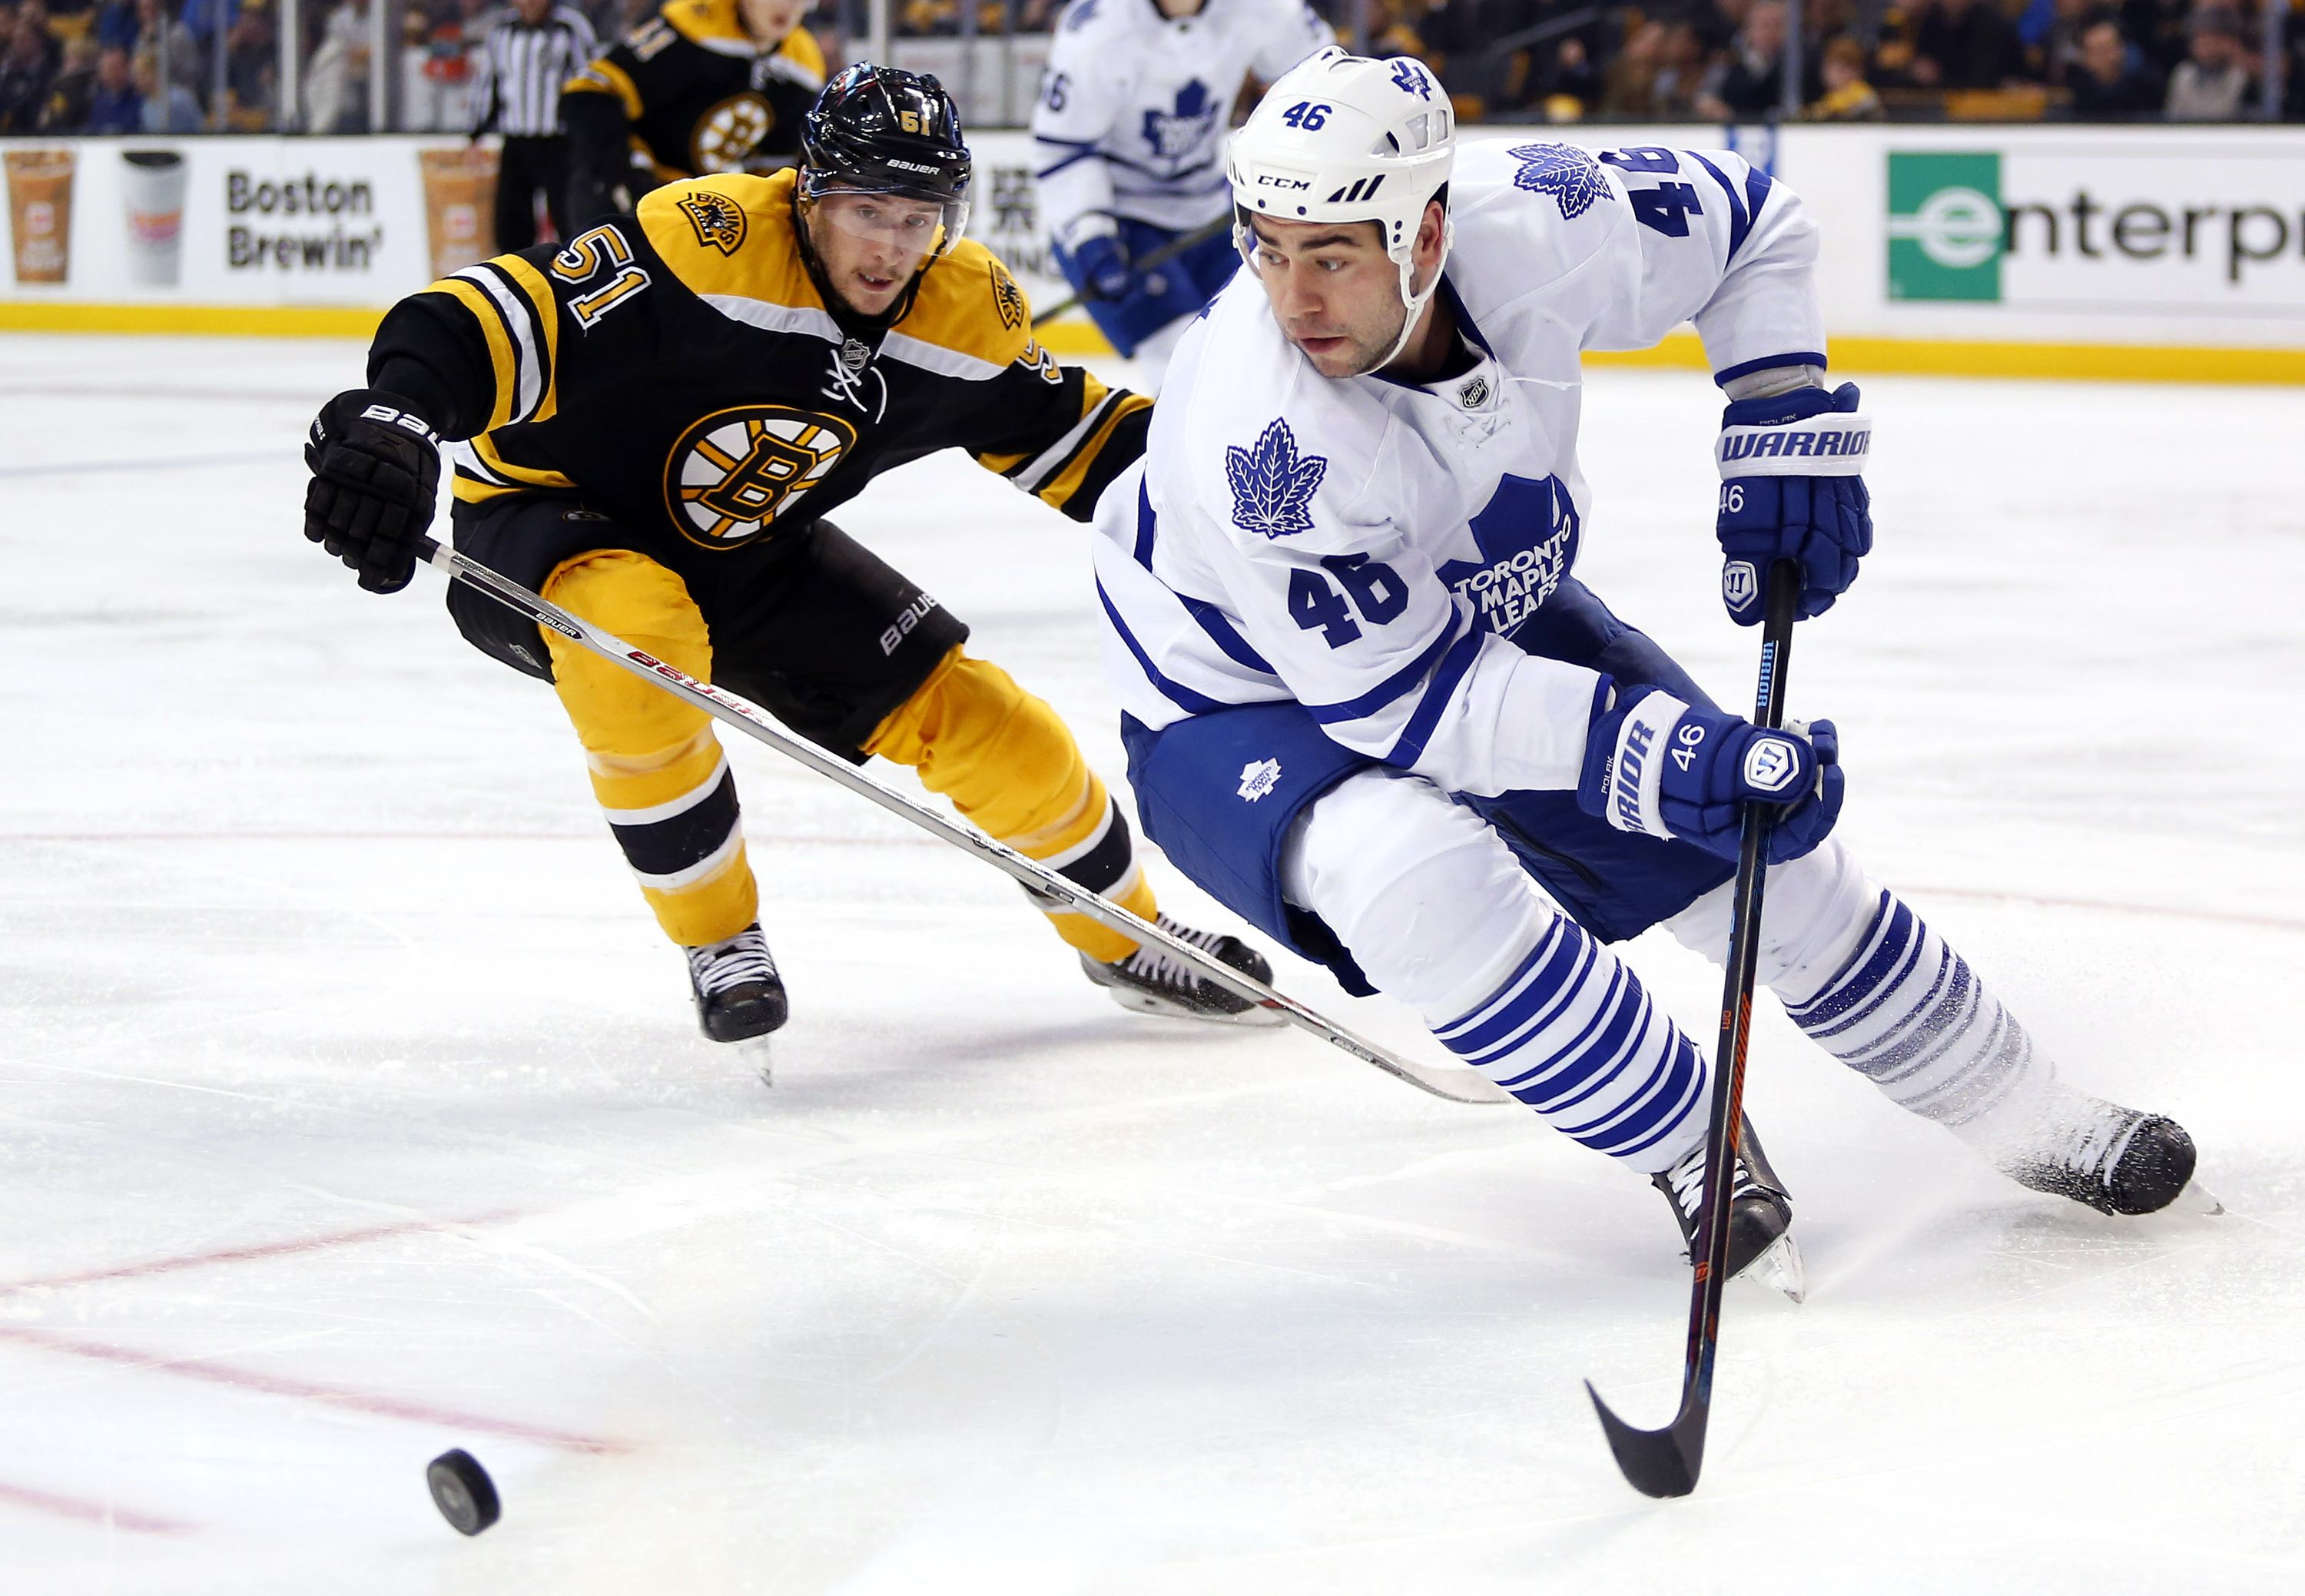 Youngsters taking over the NHL, Toronto Maple Leafs defenceman Roman Polak says National Post pic